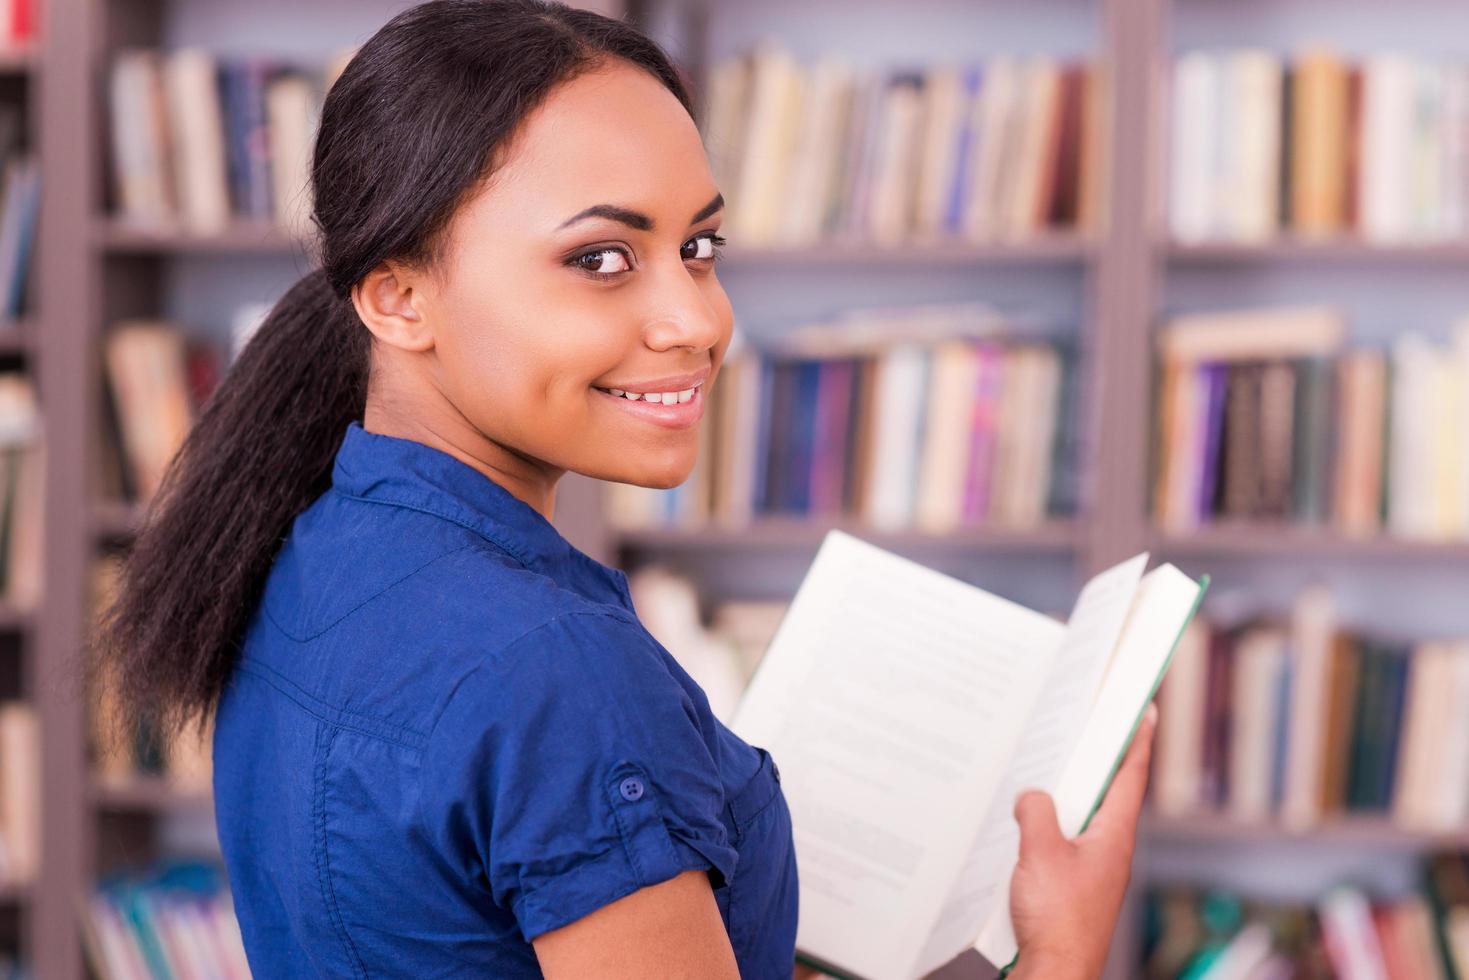 Reading her favorite book. Rear view of beautiful African female student holding a book and looking over shoulder with smile while standing in library photo